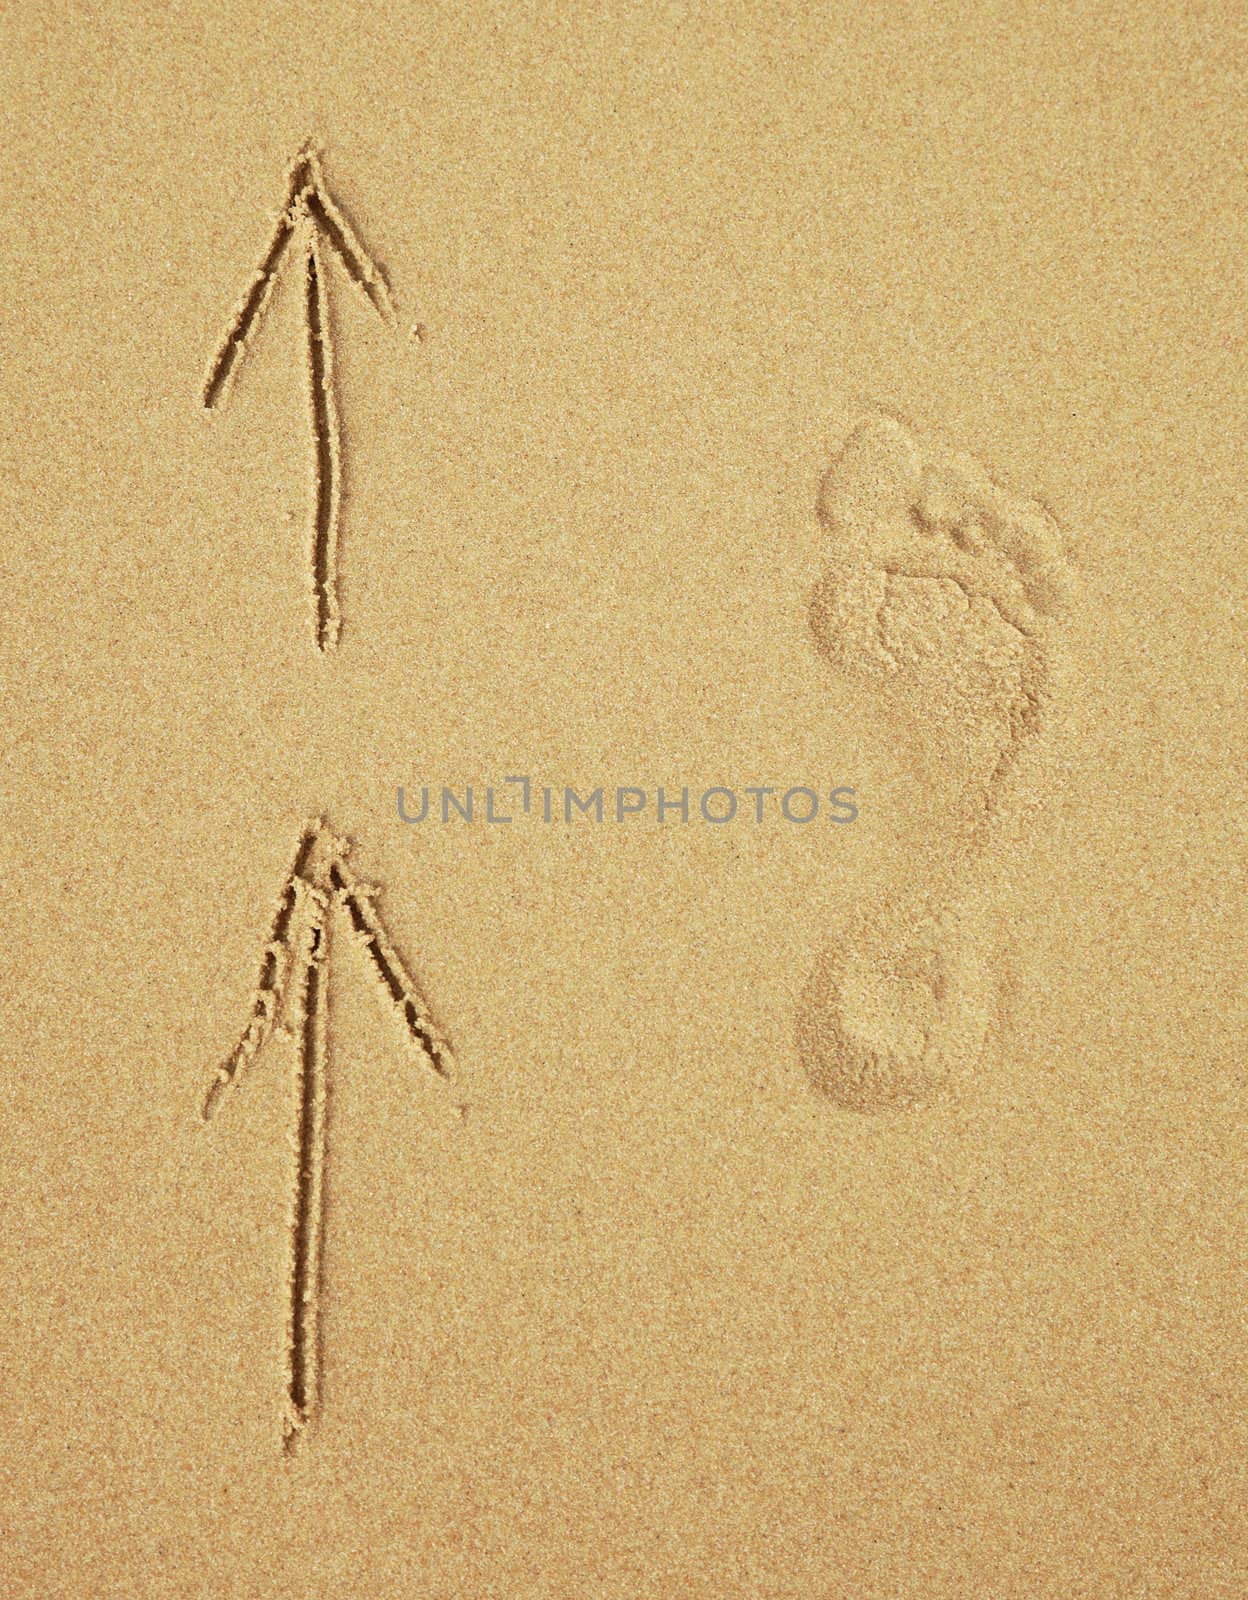 Trace of a human foot on the sand and arrows. Tourist traffic.